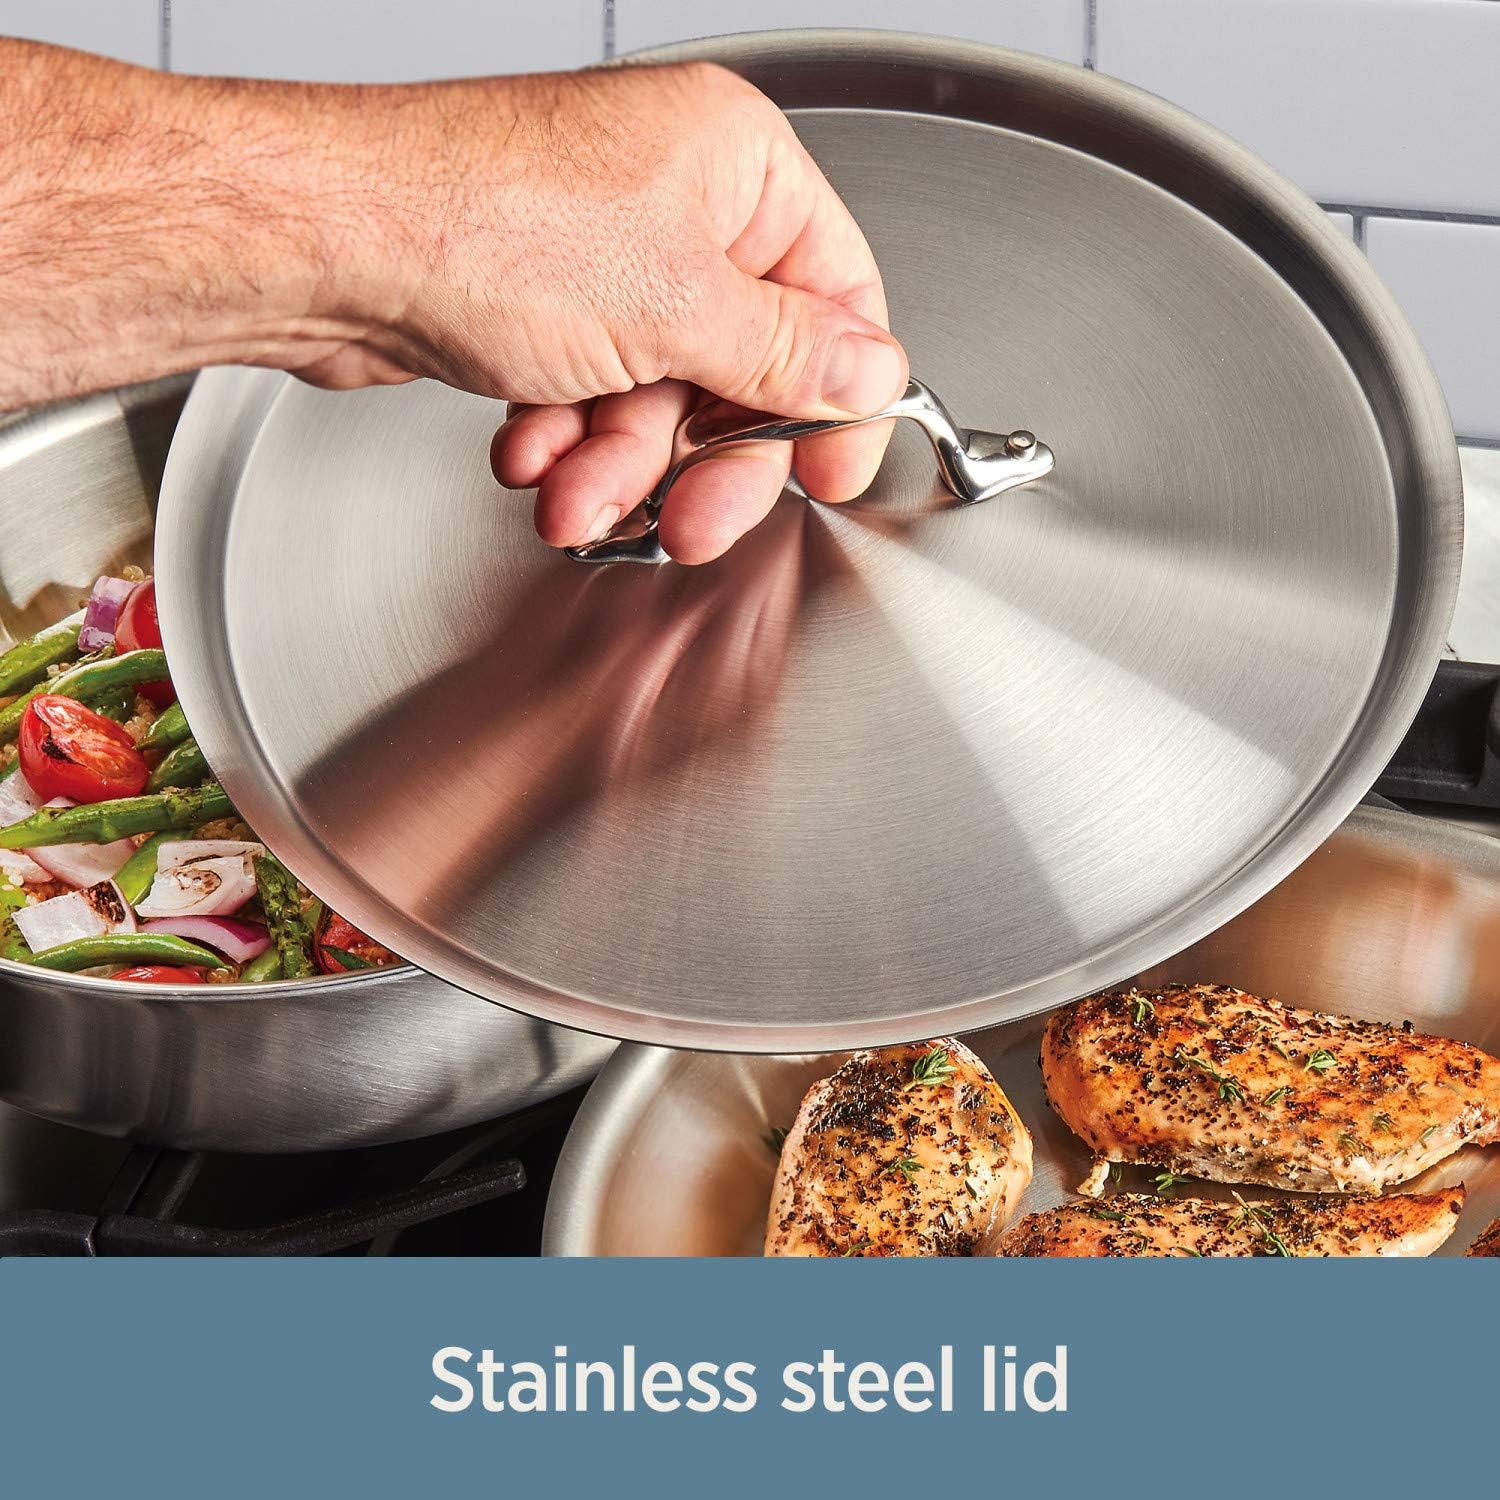 All-Clad Tri-Ply Stainless Steel 3.5 qt Sauce Pan with Lid 